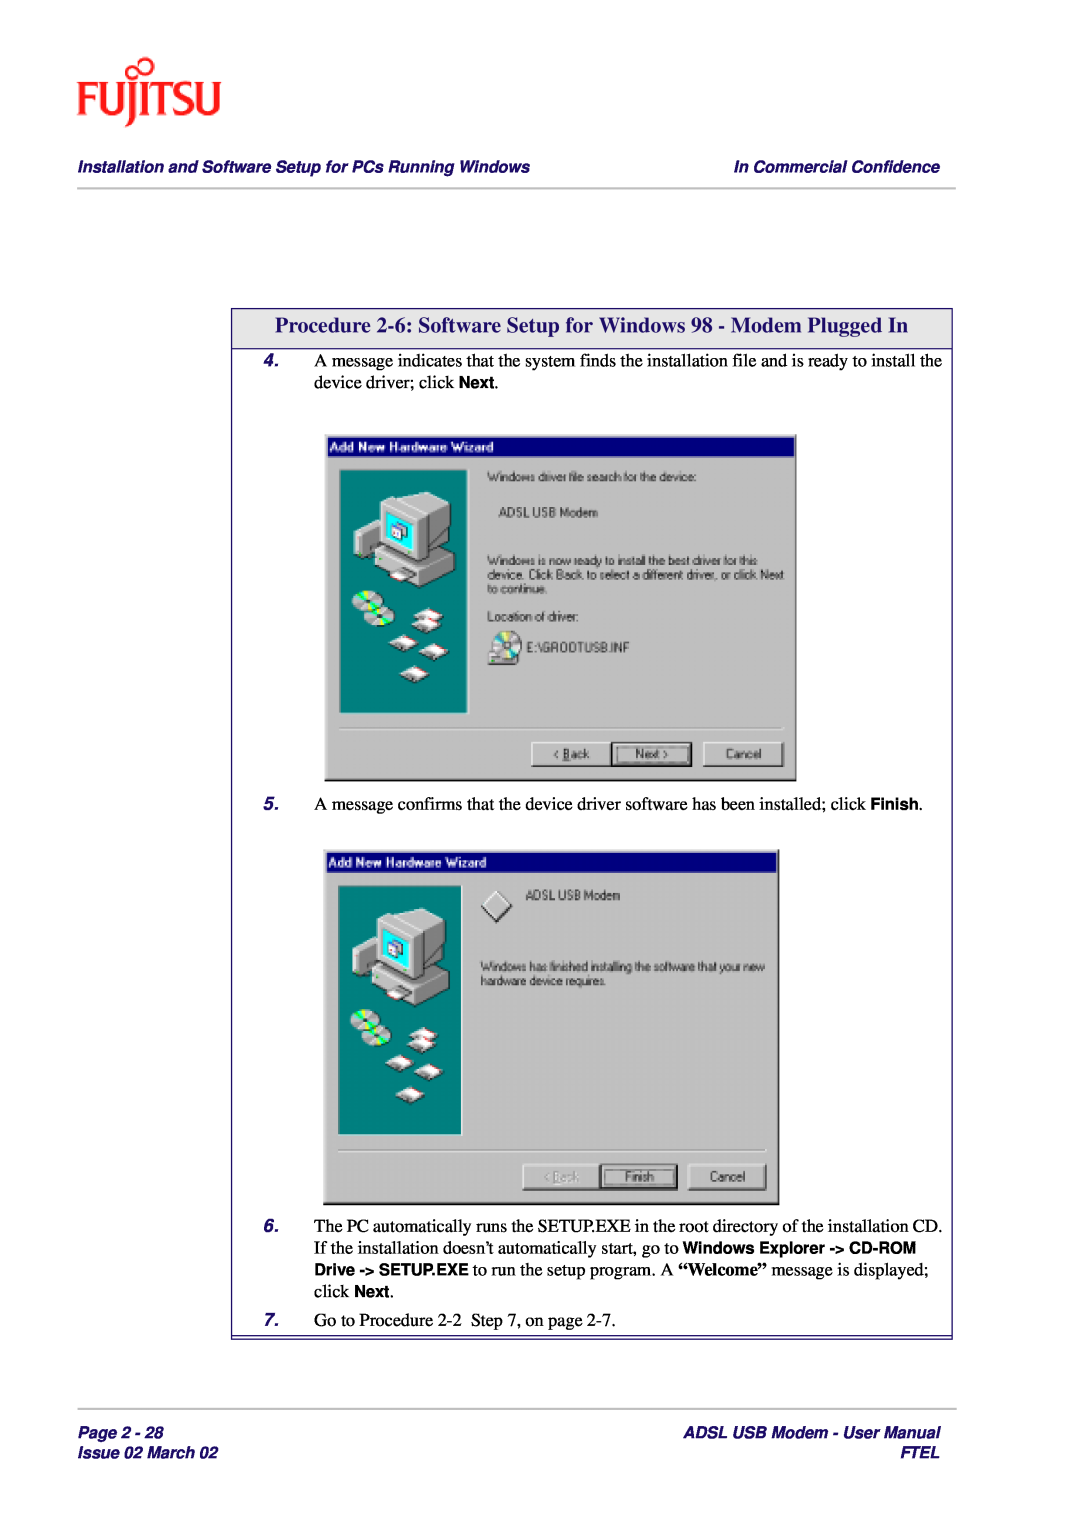 Fujitsu 3XAX-00803AAS Procedure 2-6 Software Setup for Windows 98 - Modem Plugged In, Go to Procedure 2-2 , on page 